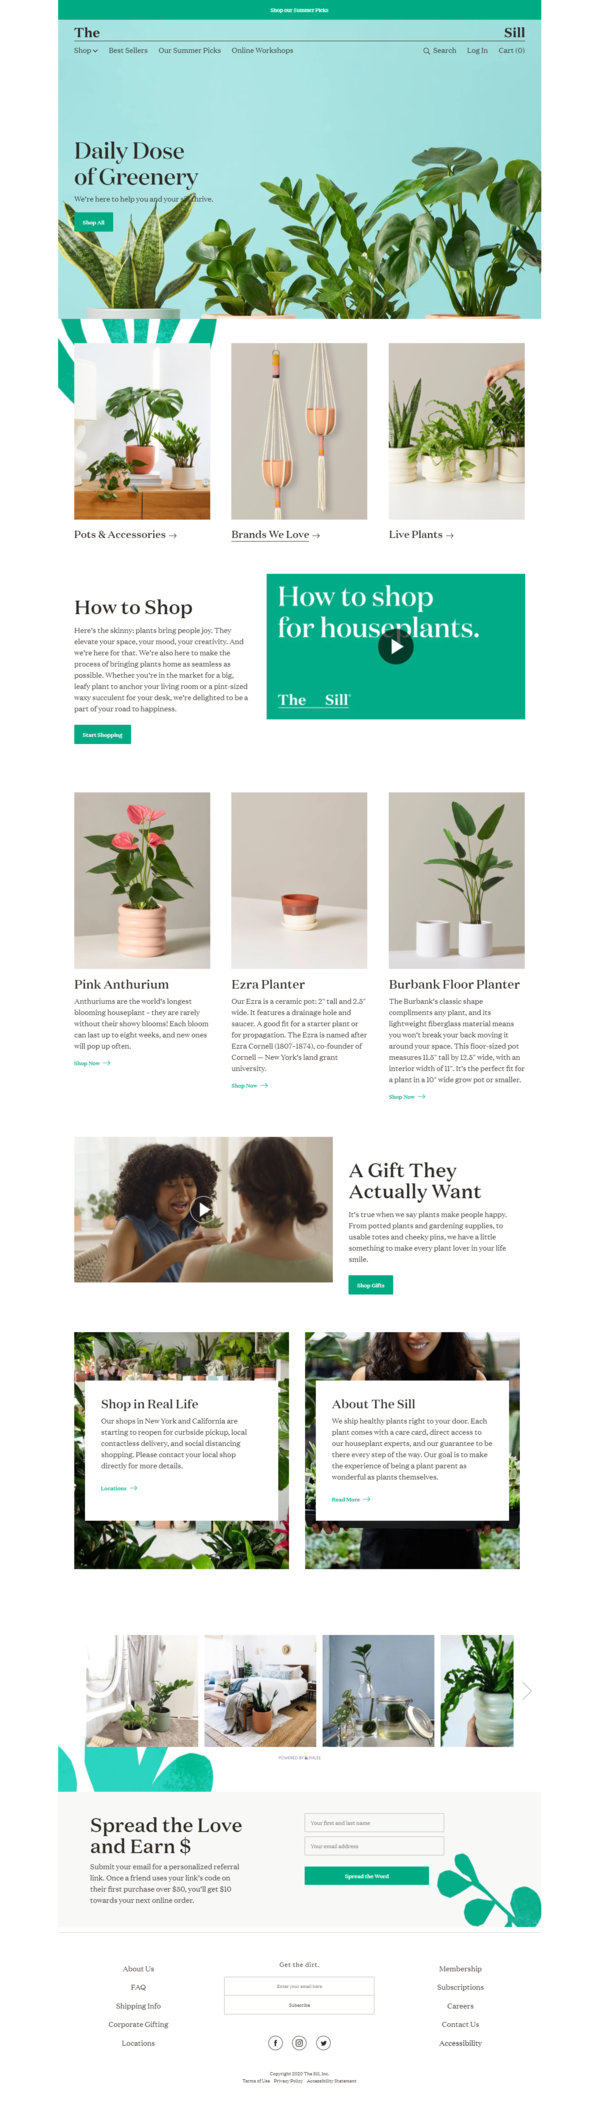 Indoor Potted Plants Delivered to Your Door - The Sill - www.thesill.com.png